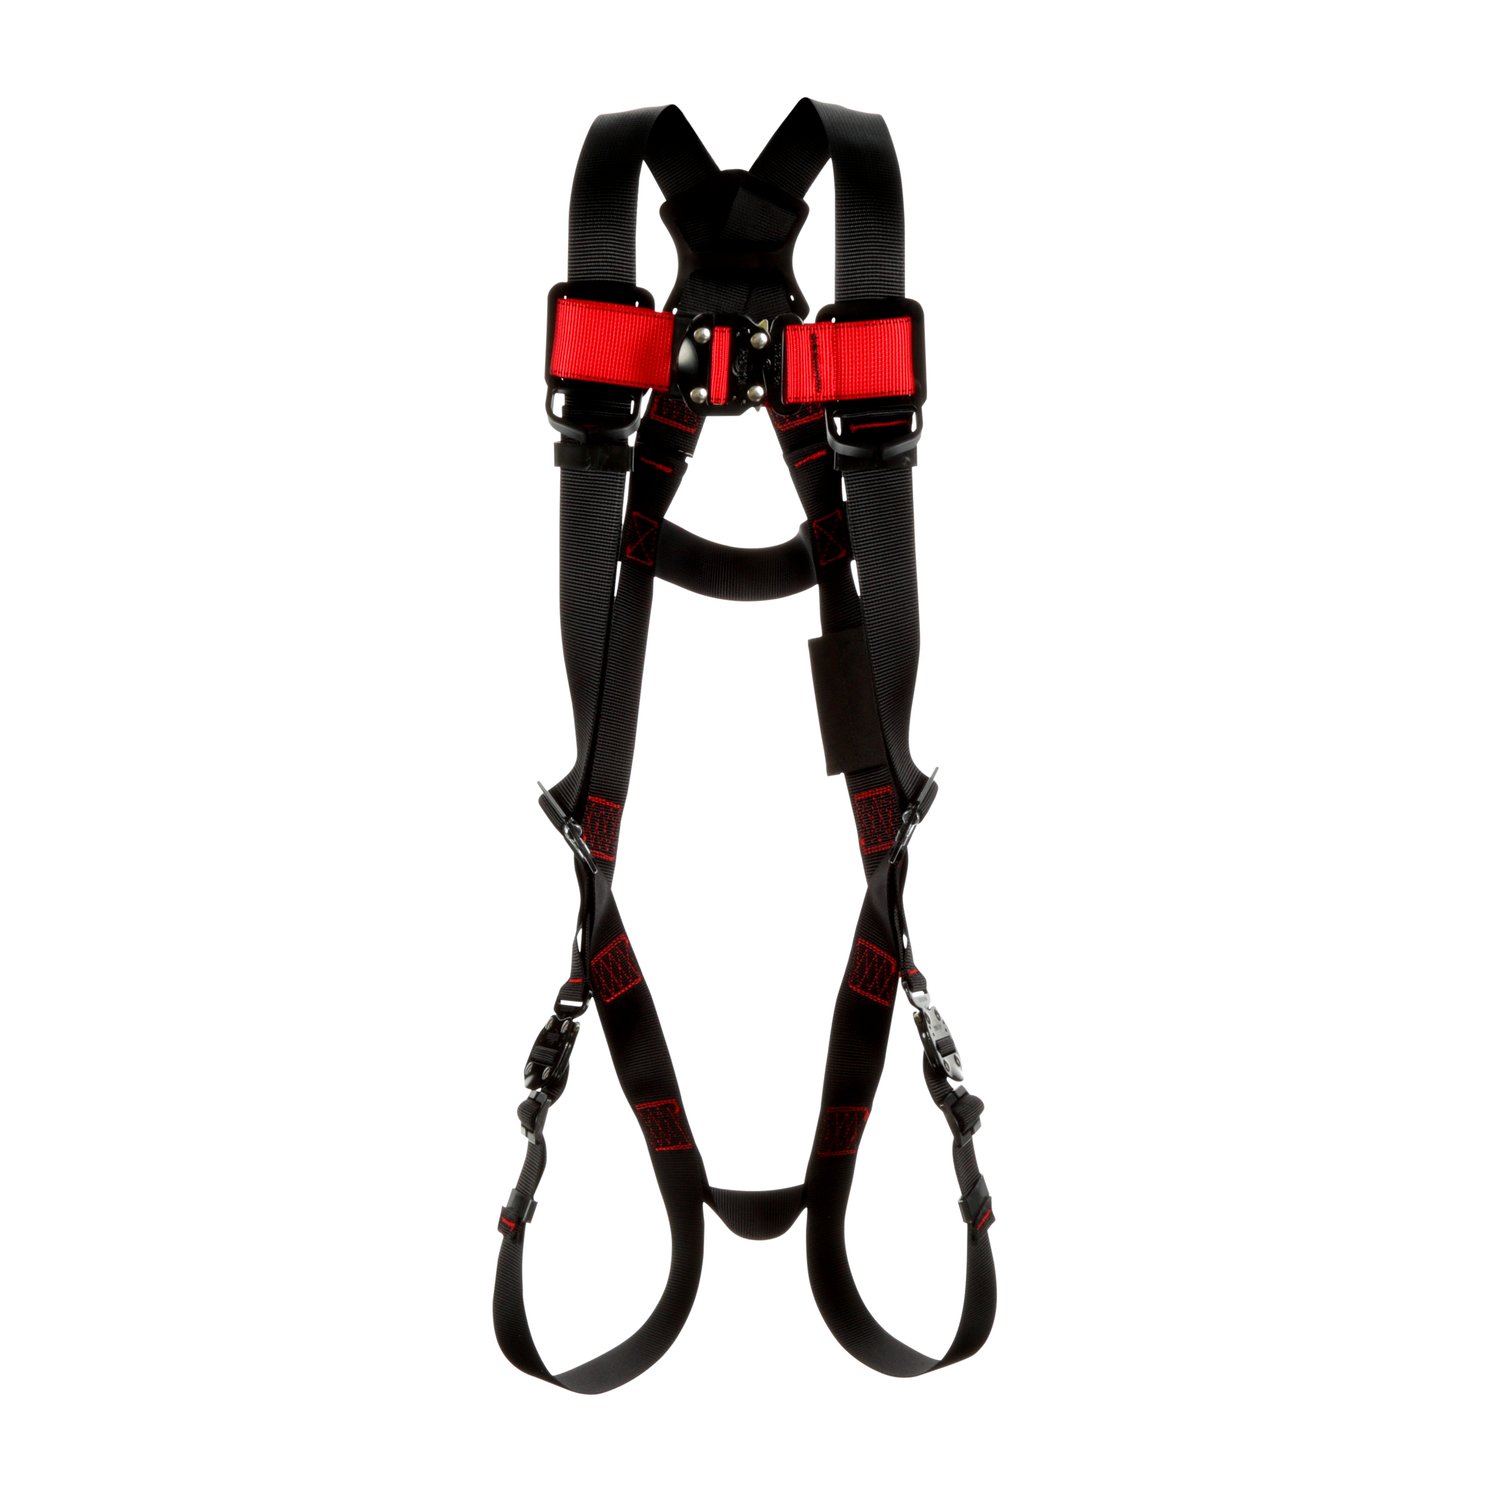 7012816775 - 3M Protecta P200 Vest Safety Harness 1161526, X-Large